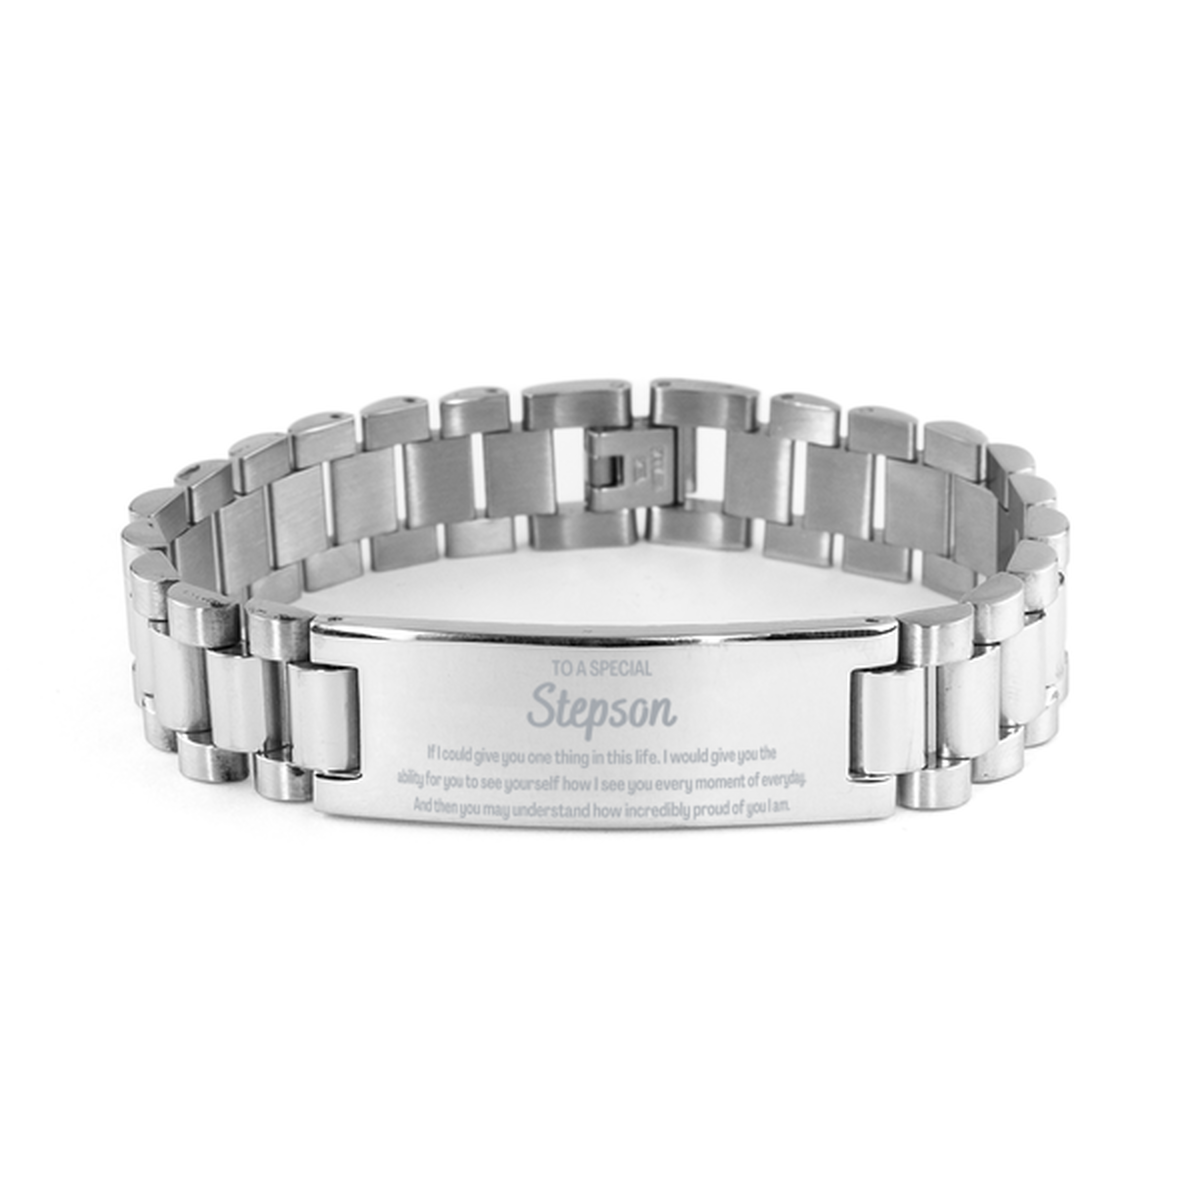 To My Stepson Ladder Stainless Steel Bracelet, Gifts For Stepson Engraved, Inspirational Gifts for Christmas Birthday, Epic Gifts for Stepson To A Special Stepson how incredibly proud of you I am